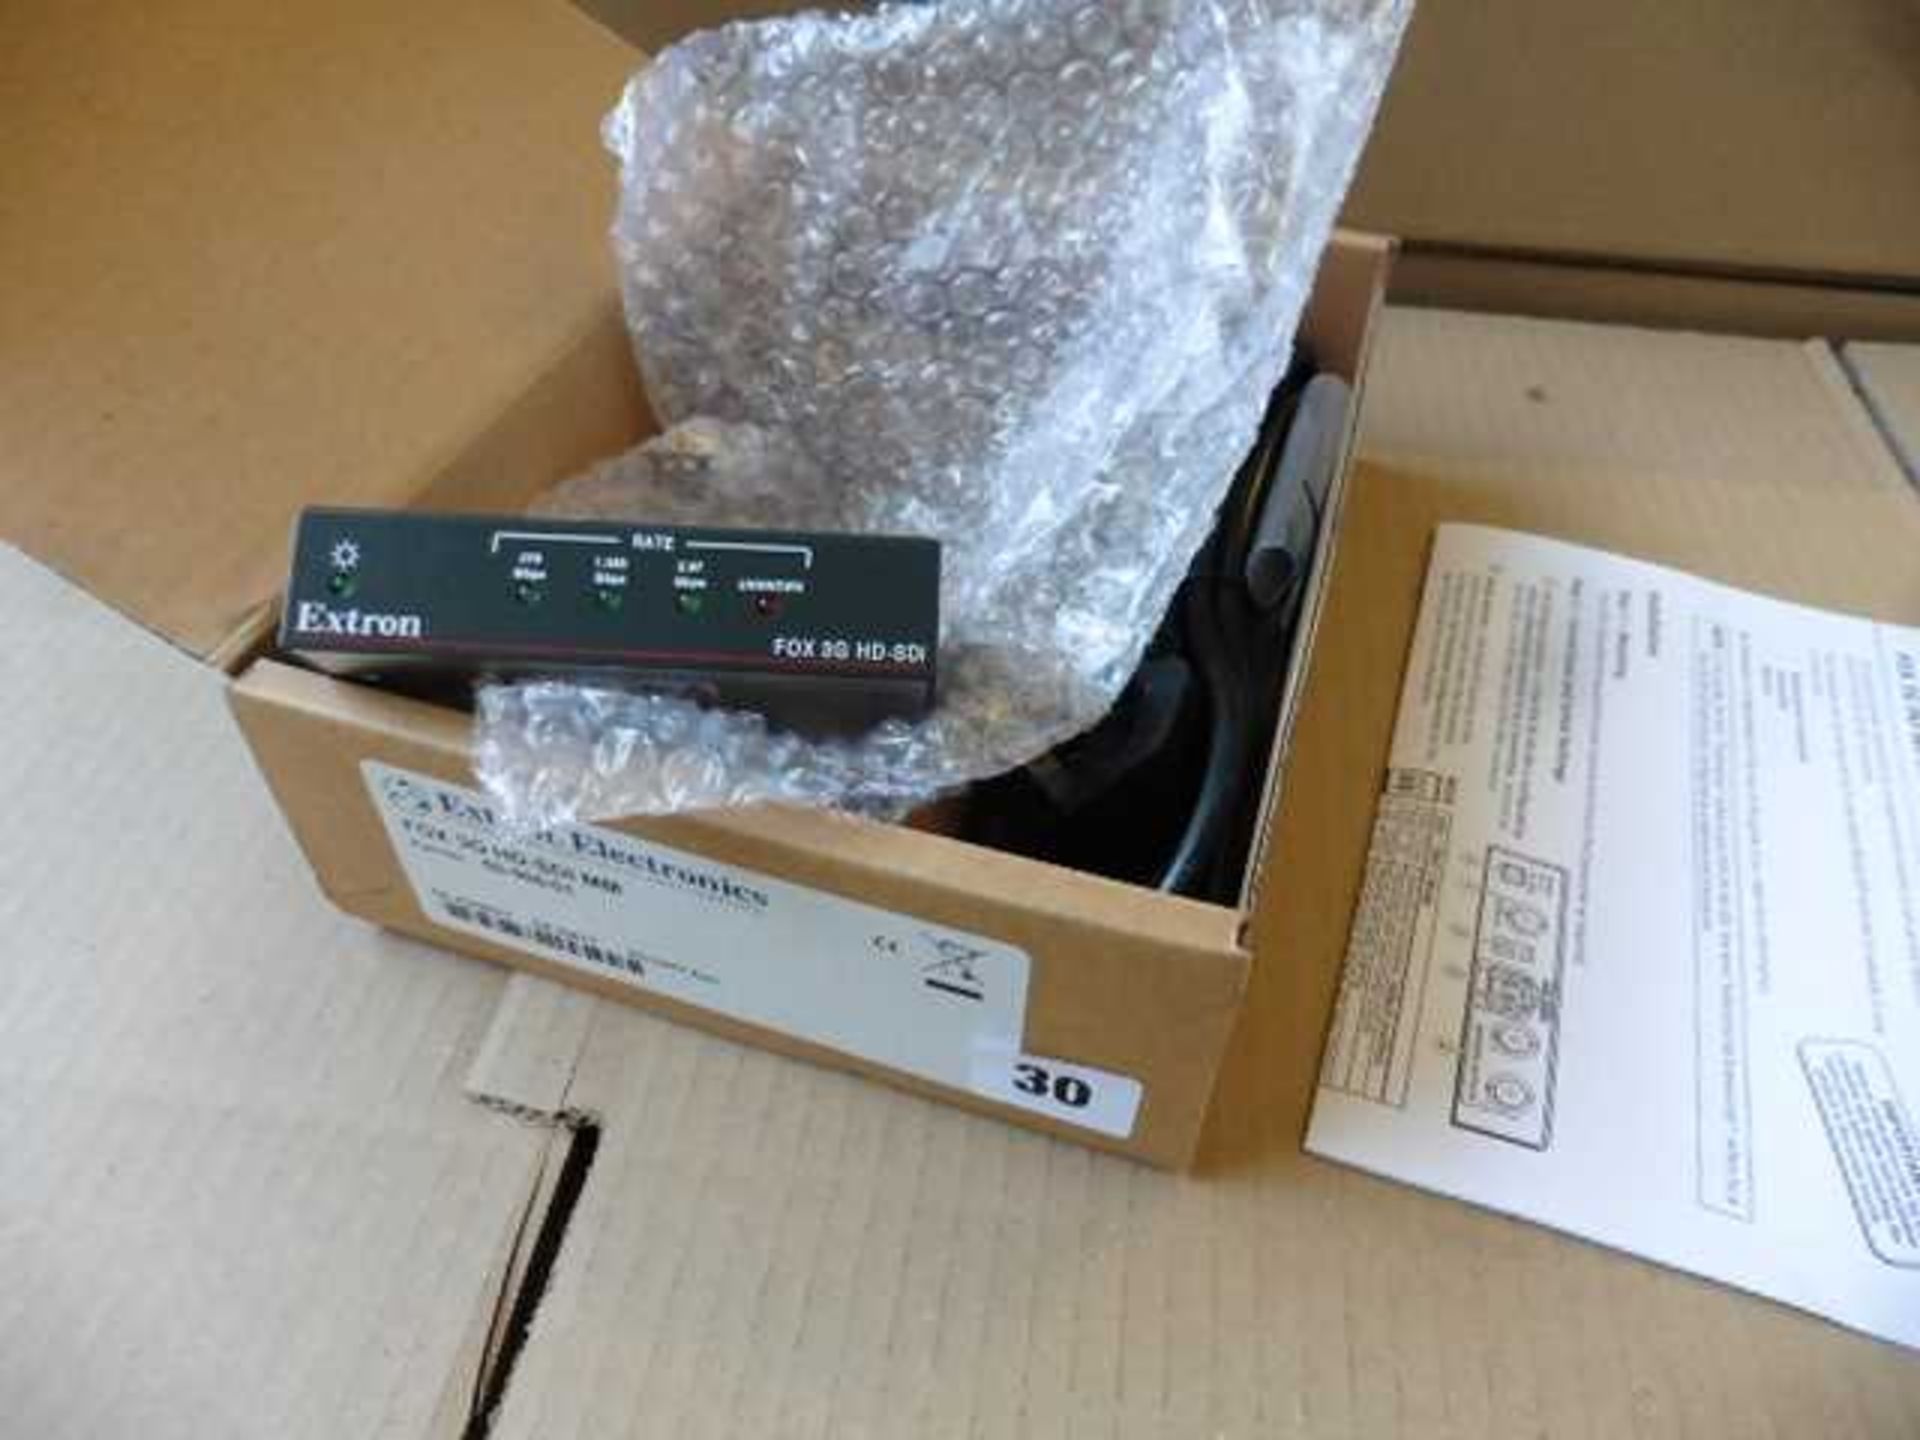 +VAT Extron Fox 3G HD-SDIMM transceiver with box, missing power supply